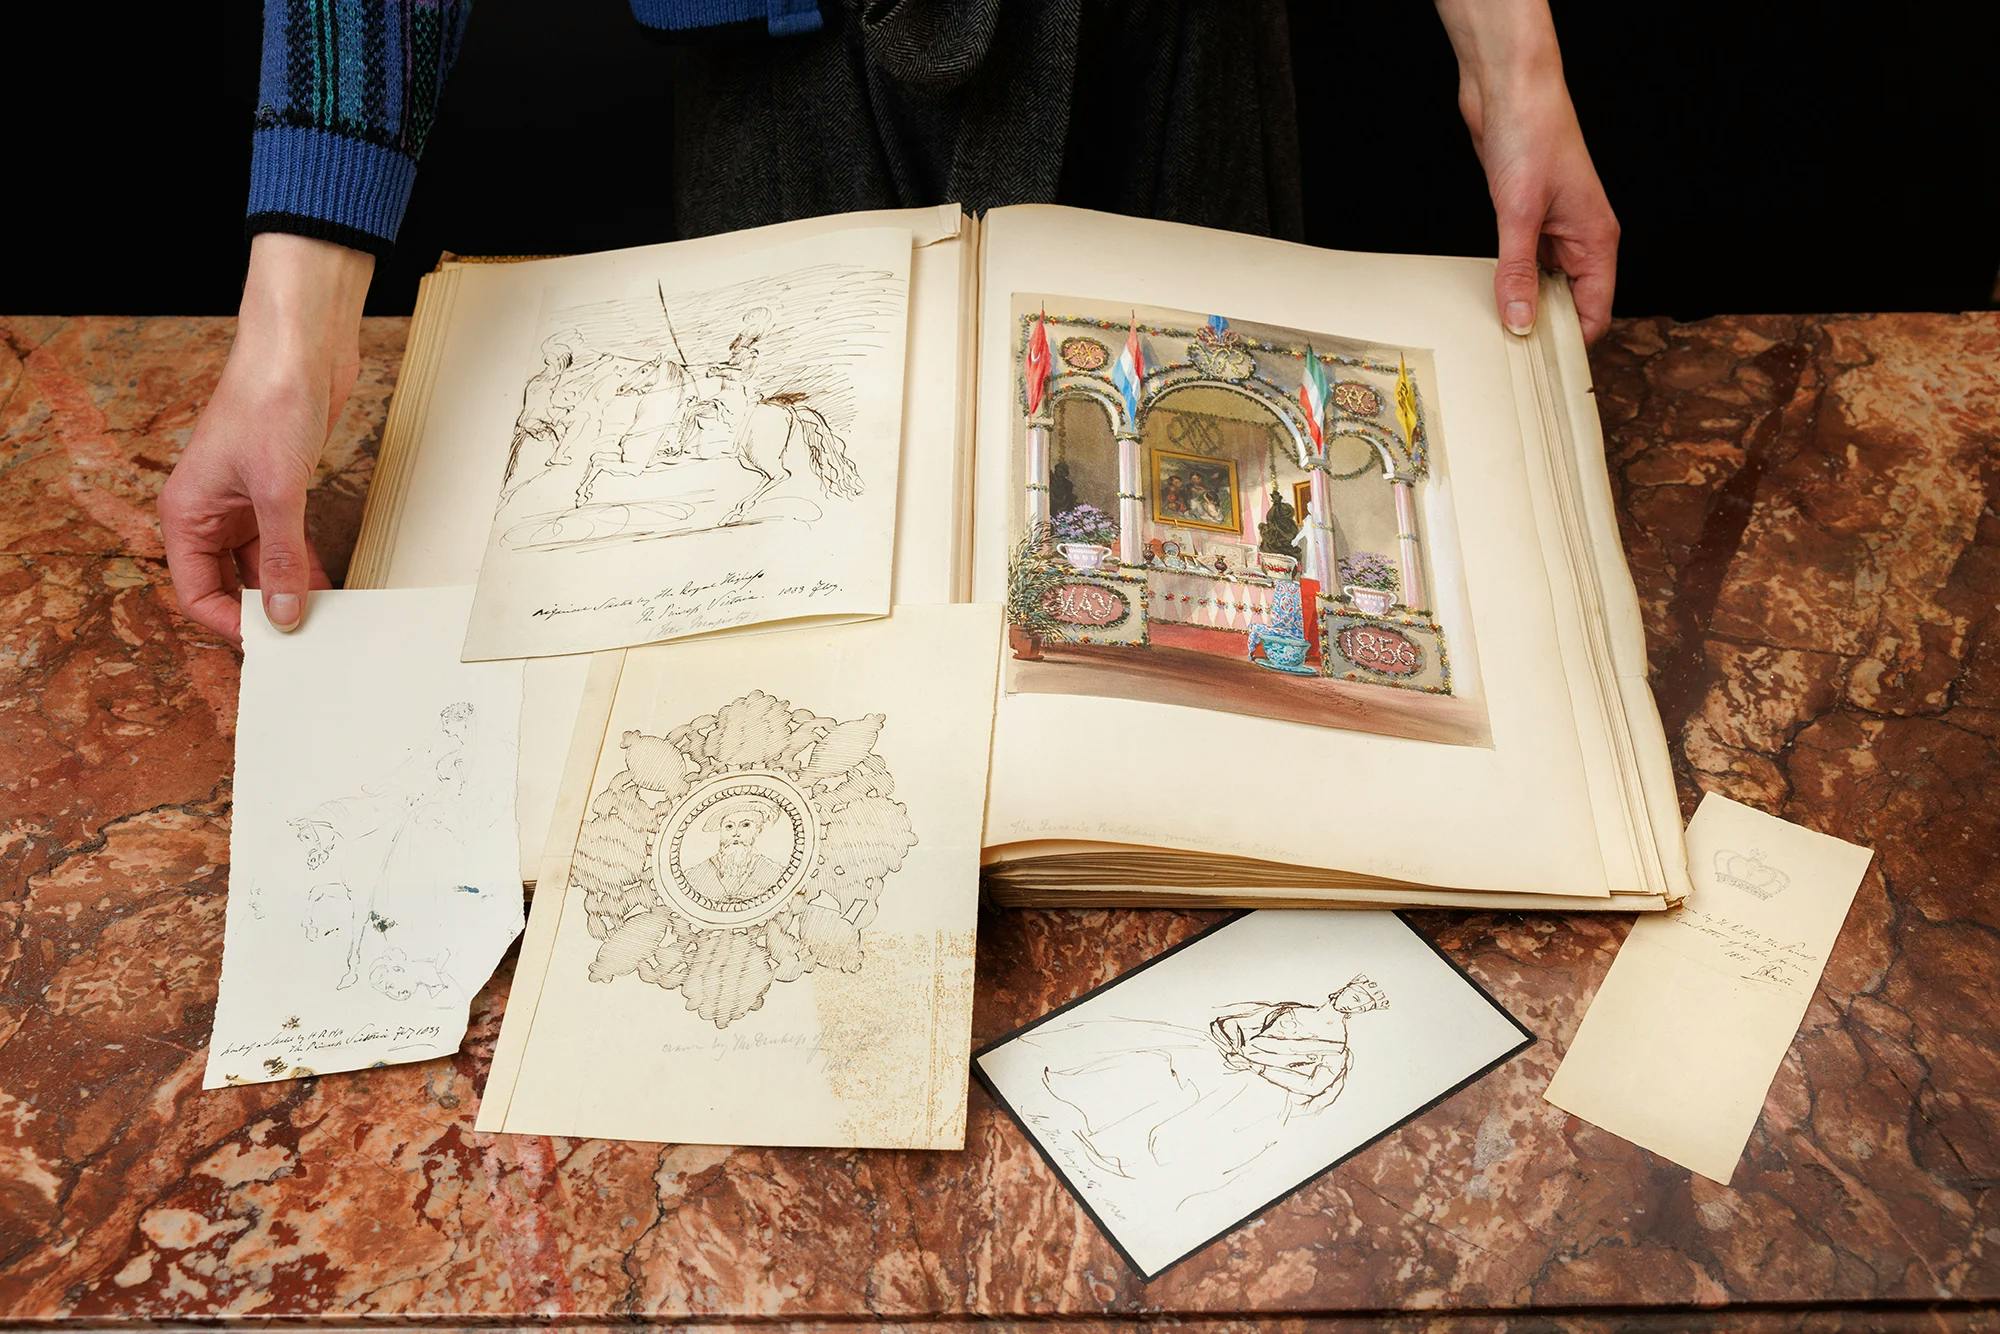 Four drawings made by Queen Victoria will be put up for auction later this month